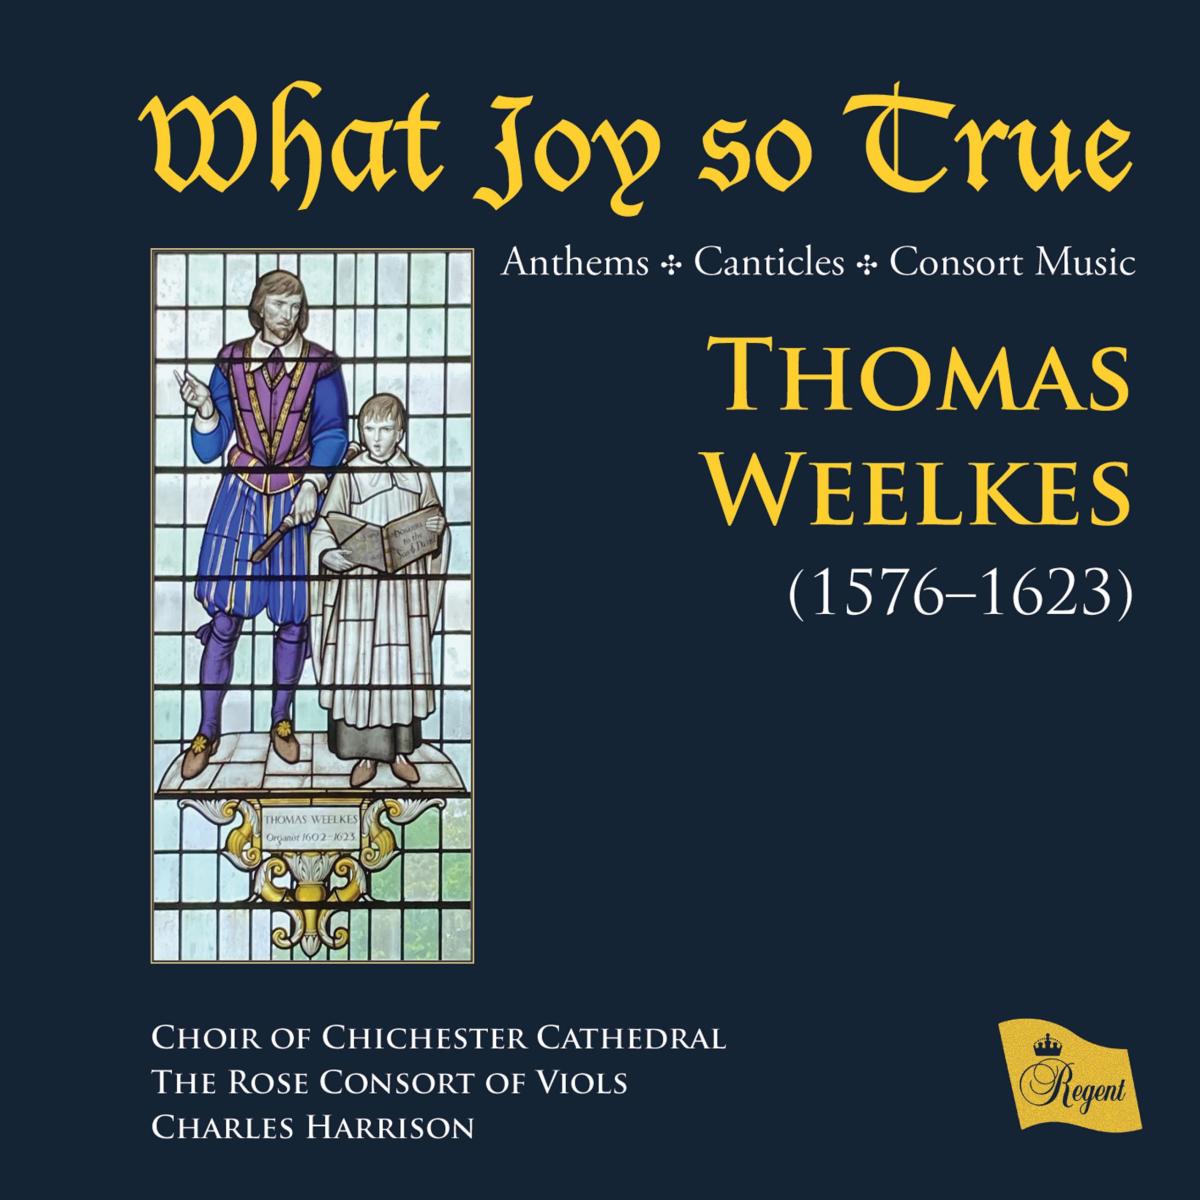 What Joy So True - anthems and motets by Thomas Weelkes